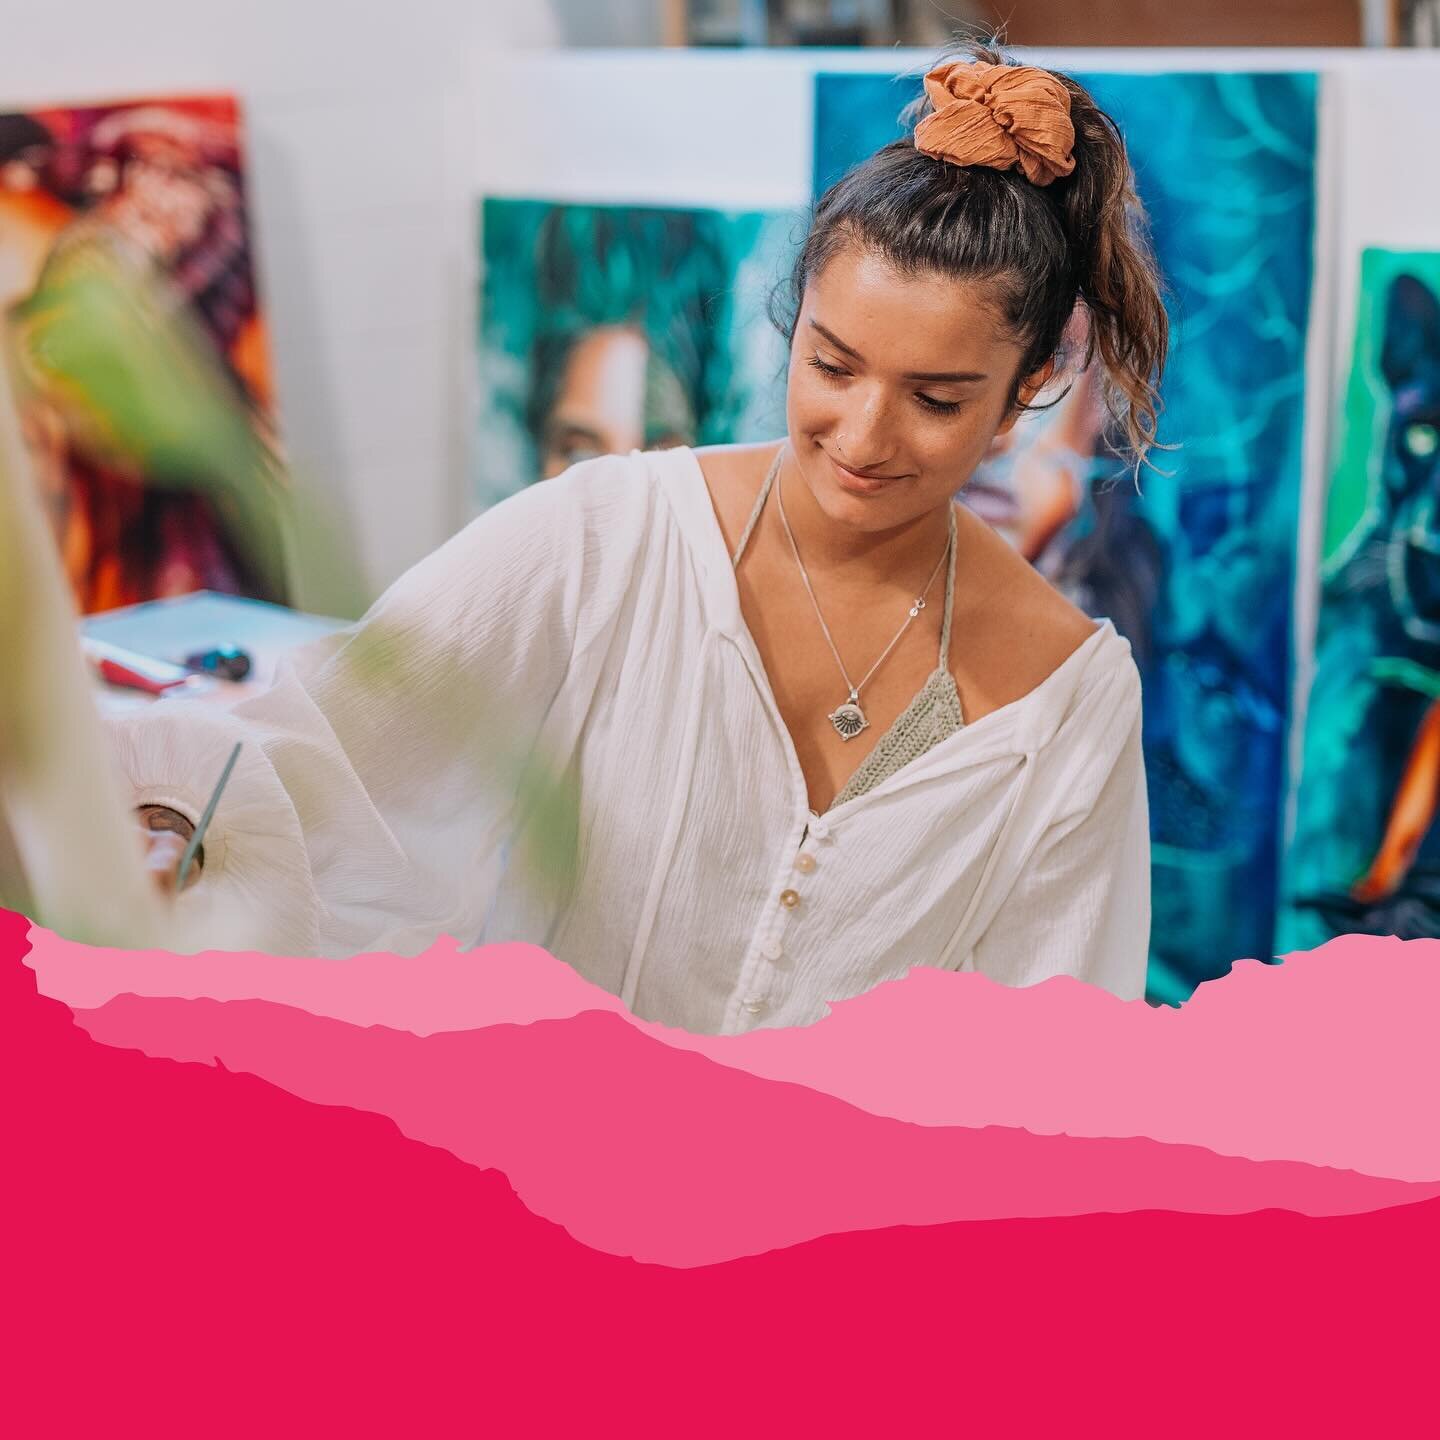 🚨Calling all Gold Coast emerging artists! 🚨

Level Up is offering two early career Gold Coast artists aged 18 to 30 years with 5 months of free studio space at Mint Art House, Burleigh Heads.
&nbsp;
This self-led studio program provides artists wit